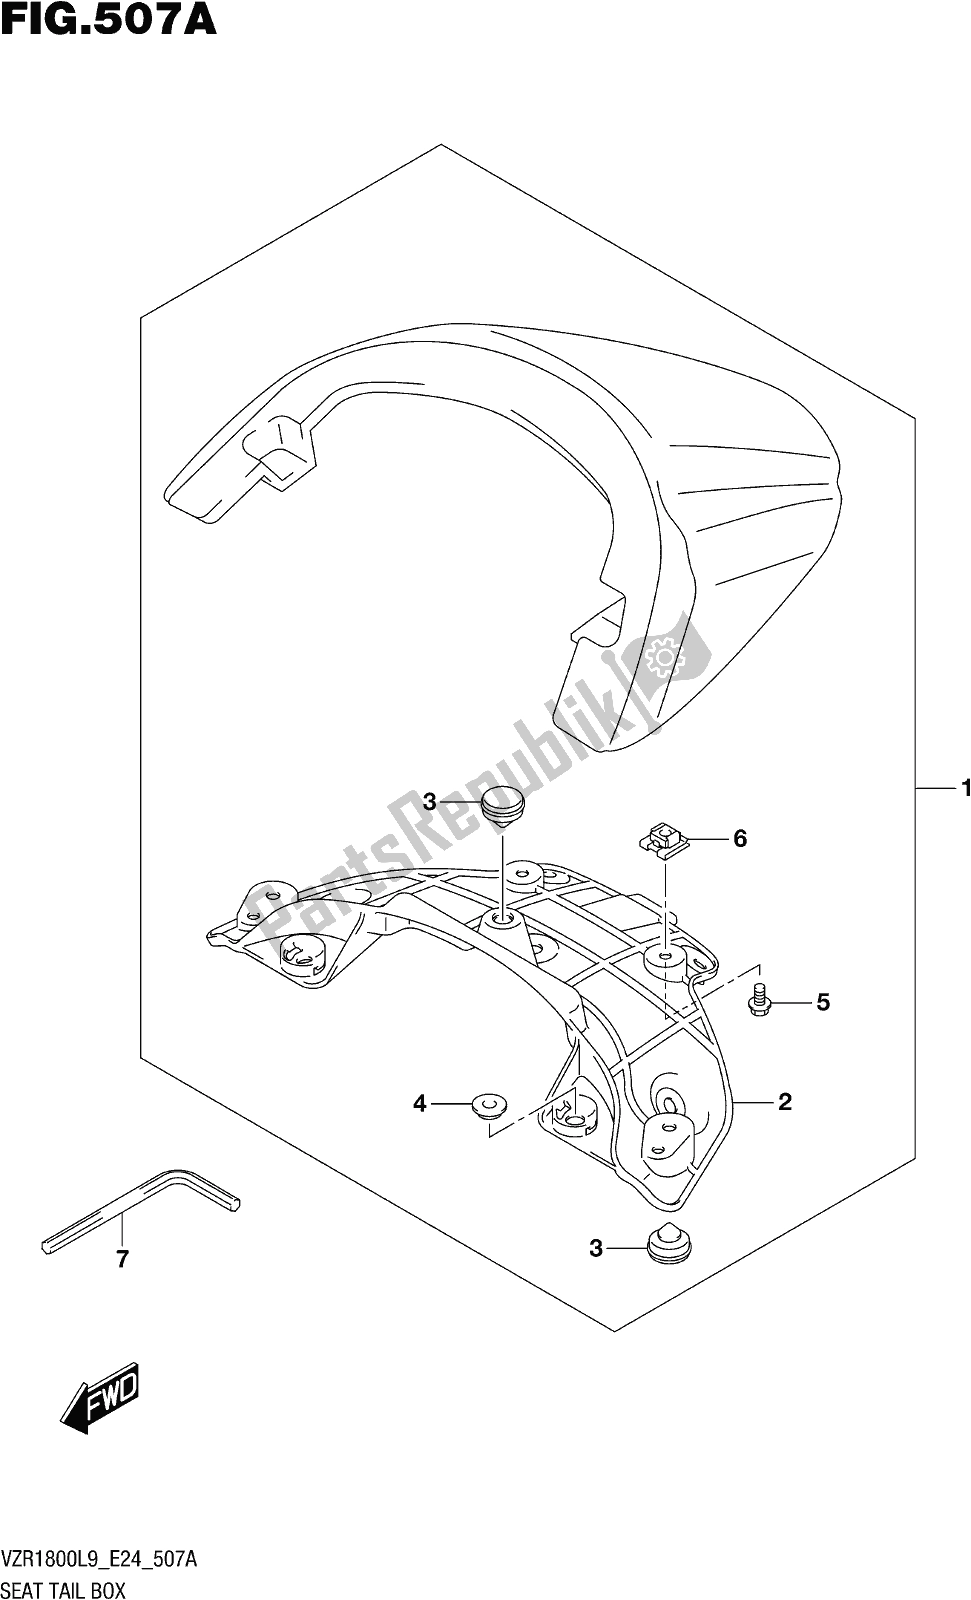 All parts for the Fig. 507a Seat Tail Box (vzr1800l9 E24) of the Suzuki VZR 1800 2019